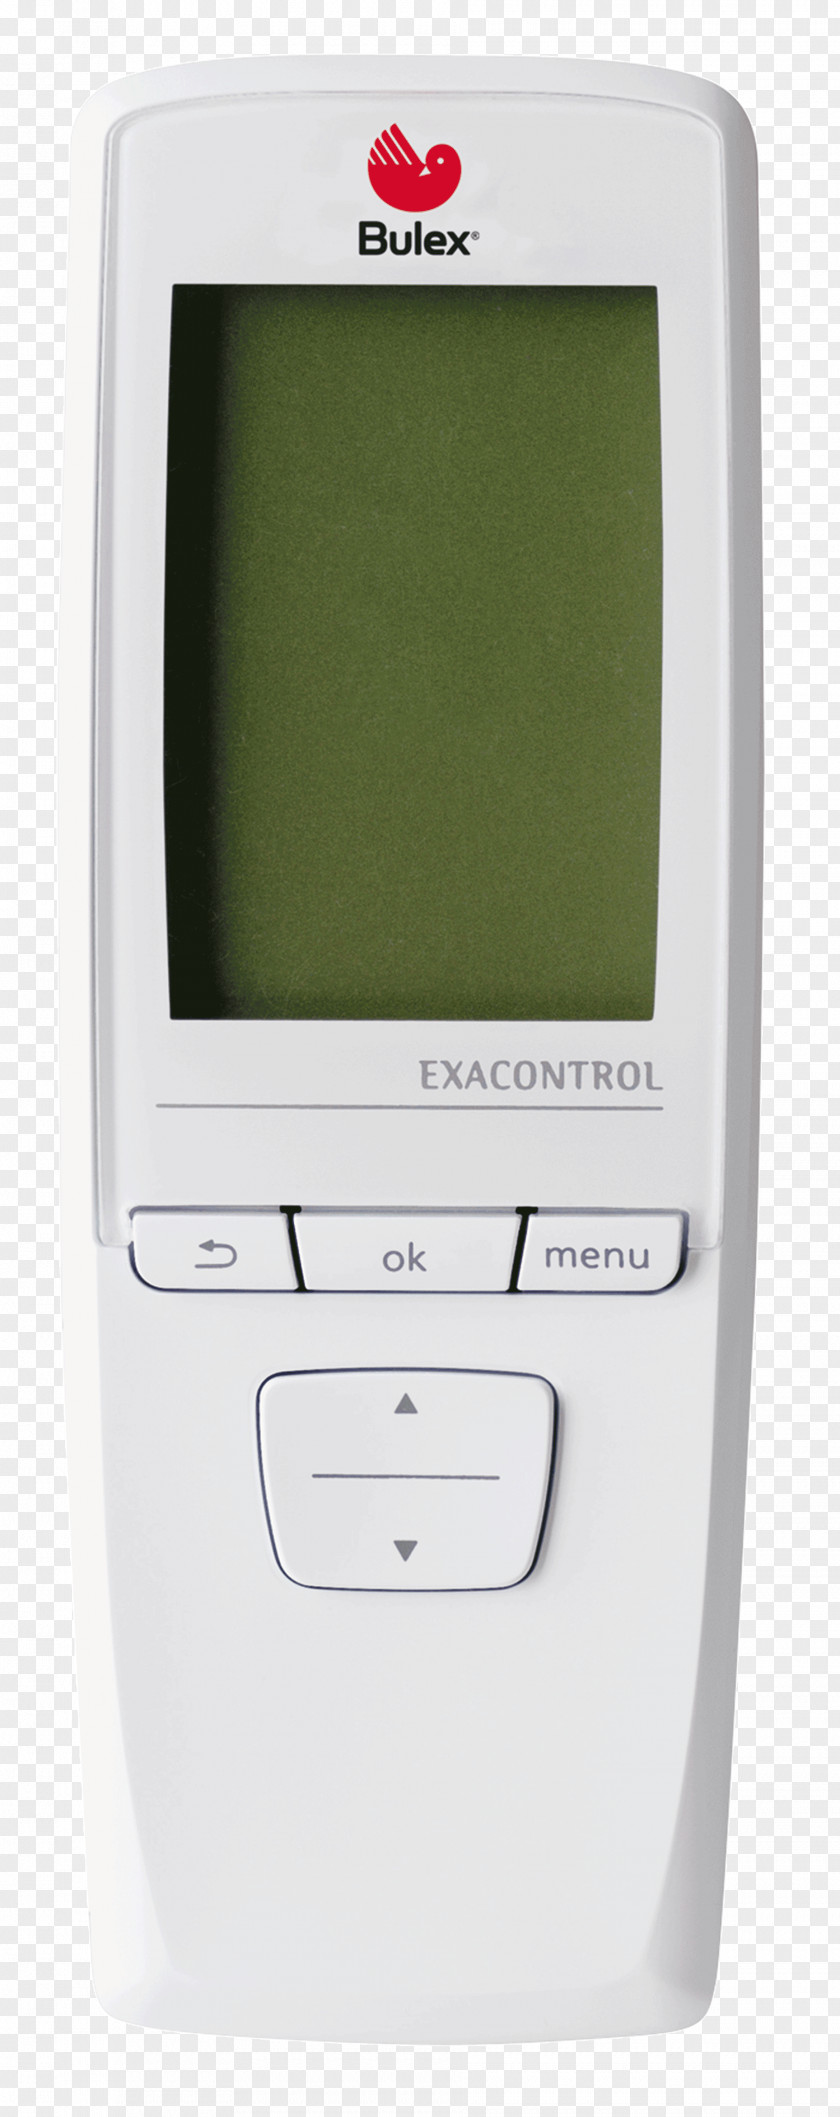 Install The Master Programmable Thermostat Boiler Wireless Network Exacontrol 7 PNG